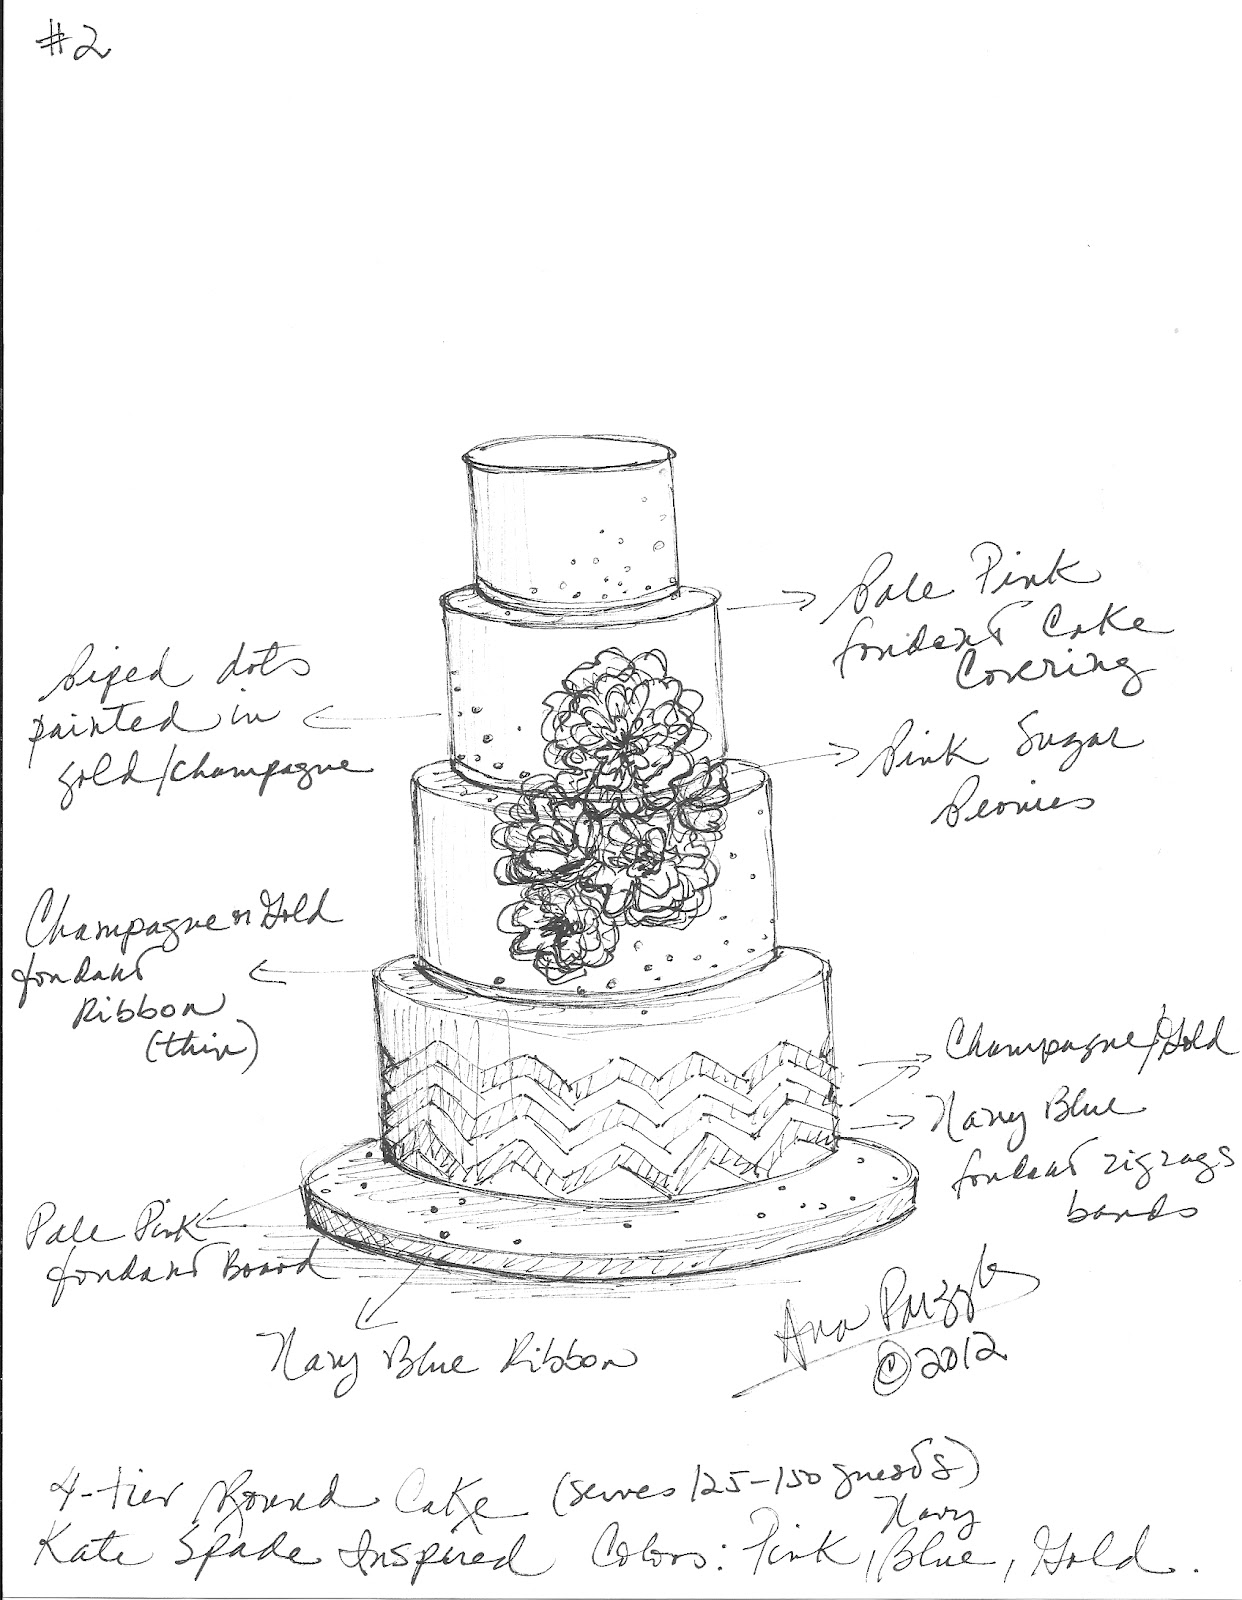 For the Love of Cake! by Garry & Ana Parzych: June 2012